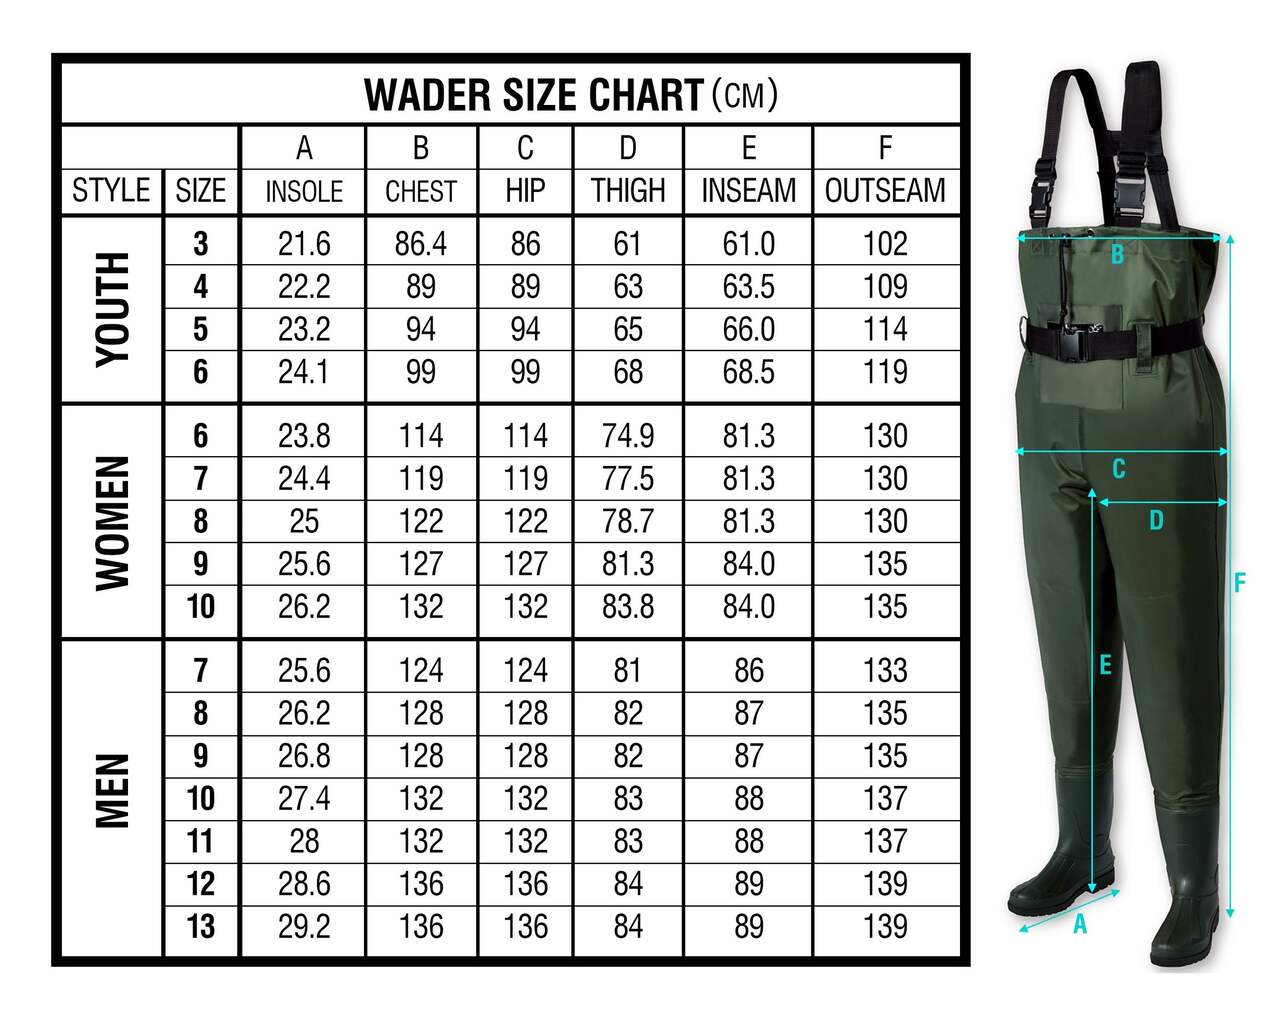 FISHINGSIR Fishing Chest Waders for Men with Boots Mens Womens Hunting  Bootfoot Waterproof Nylon and PVC Waders with Wading Belt : :  Sports, Fitness & Outdoors